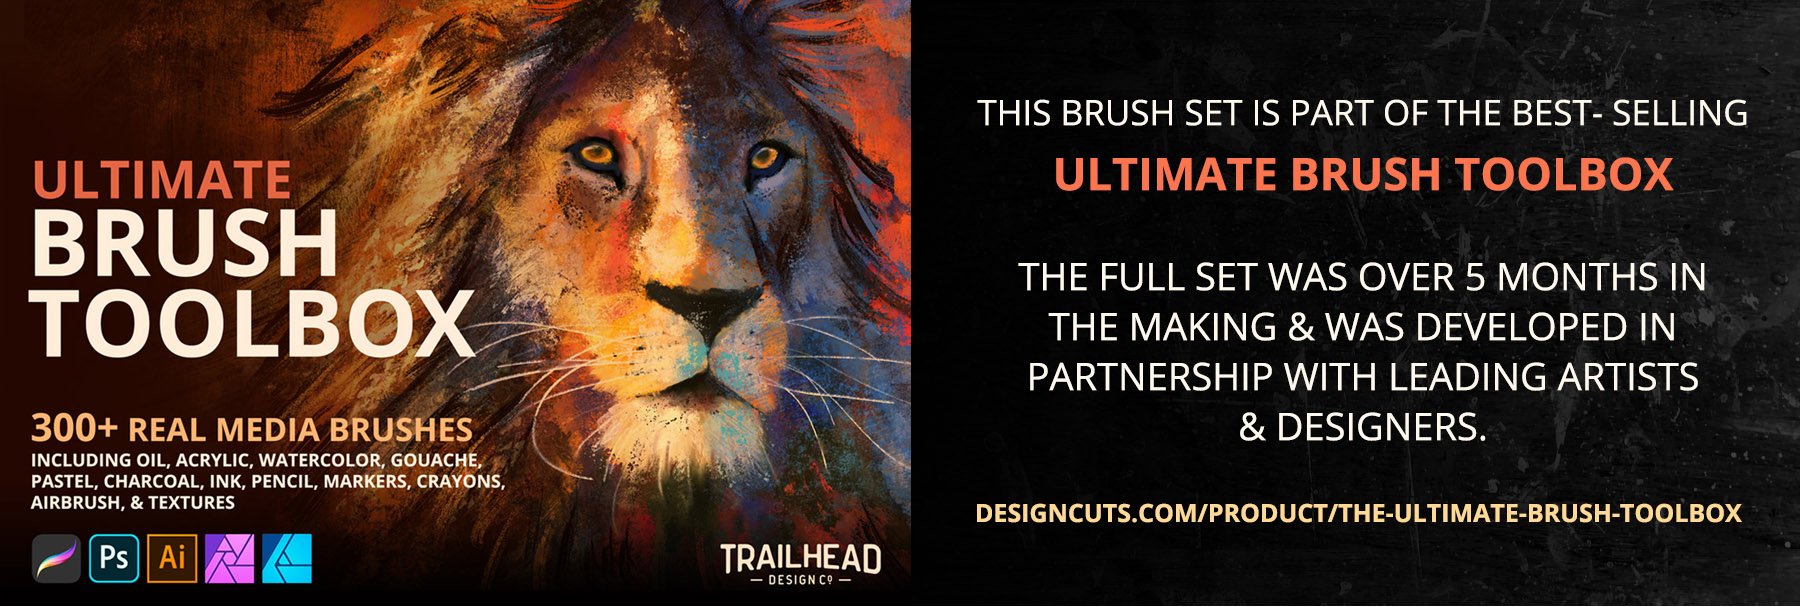 Ultimate Brush Toolbox - Ink Brushes